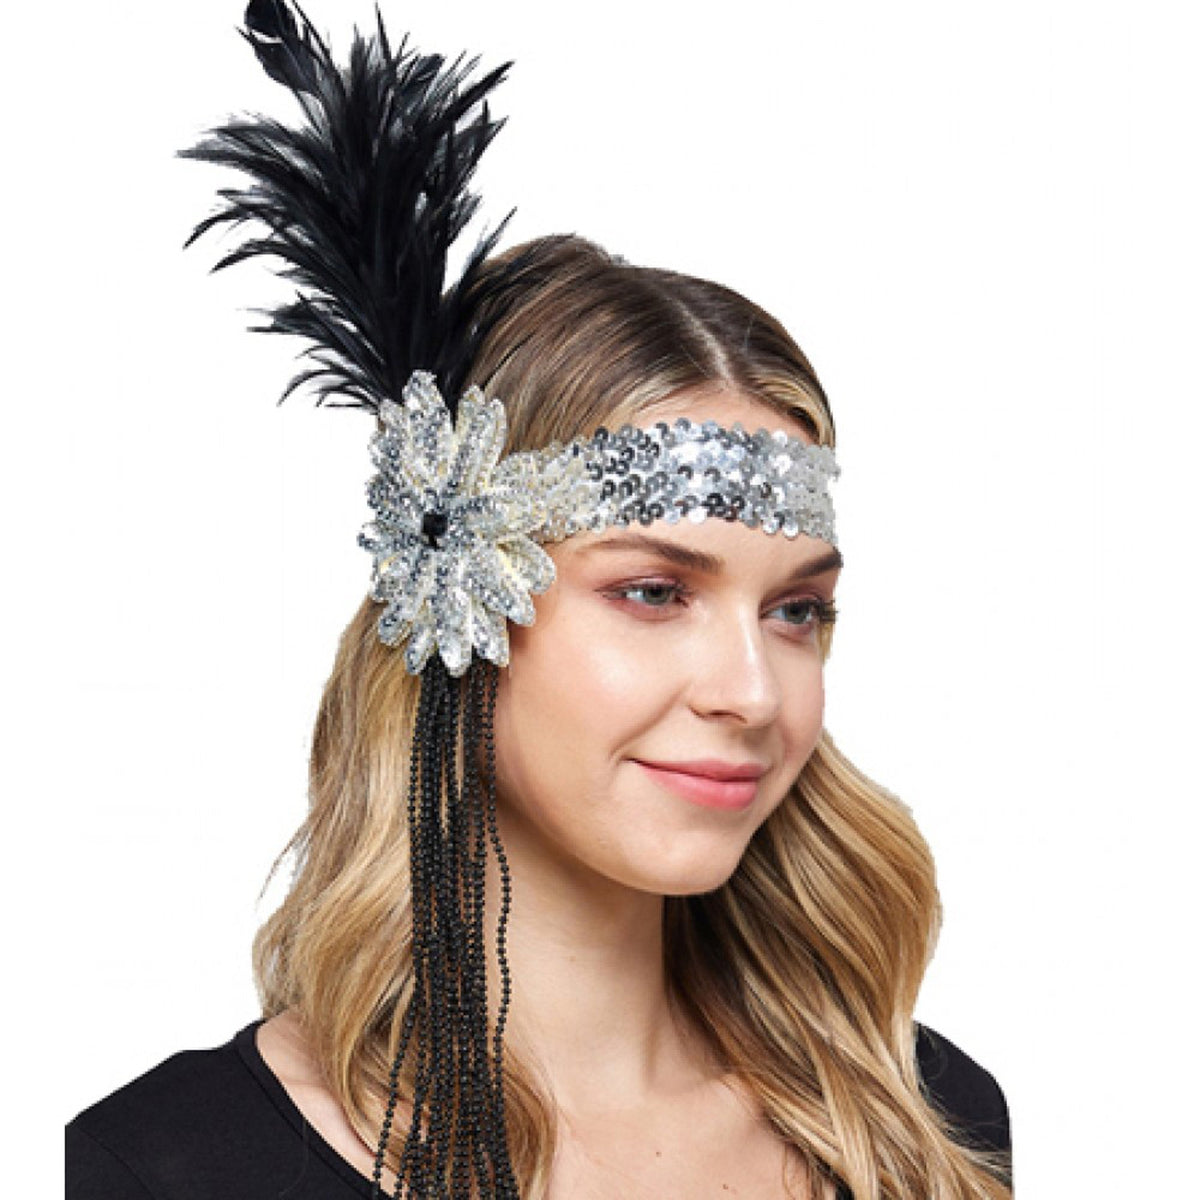 KBW GLOBAL CORP Costume Accessories 20's Flapper Headband with Sequin 831687034459